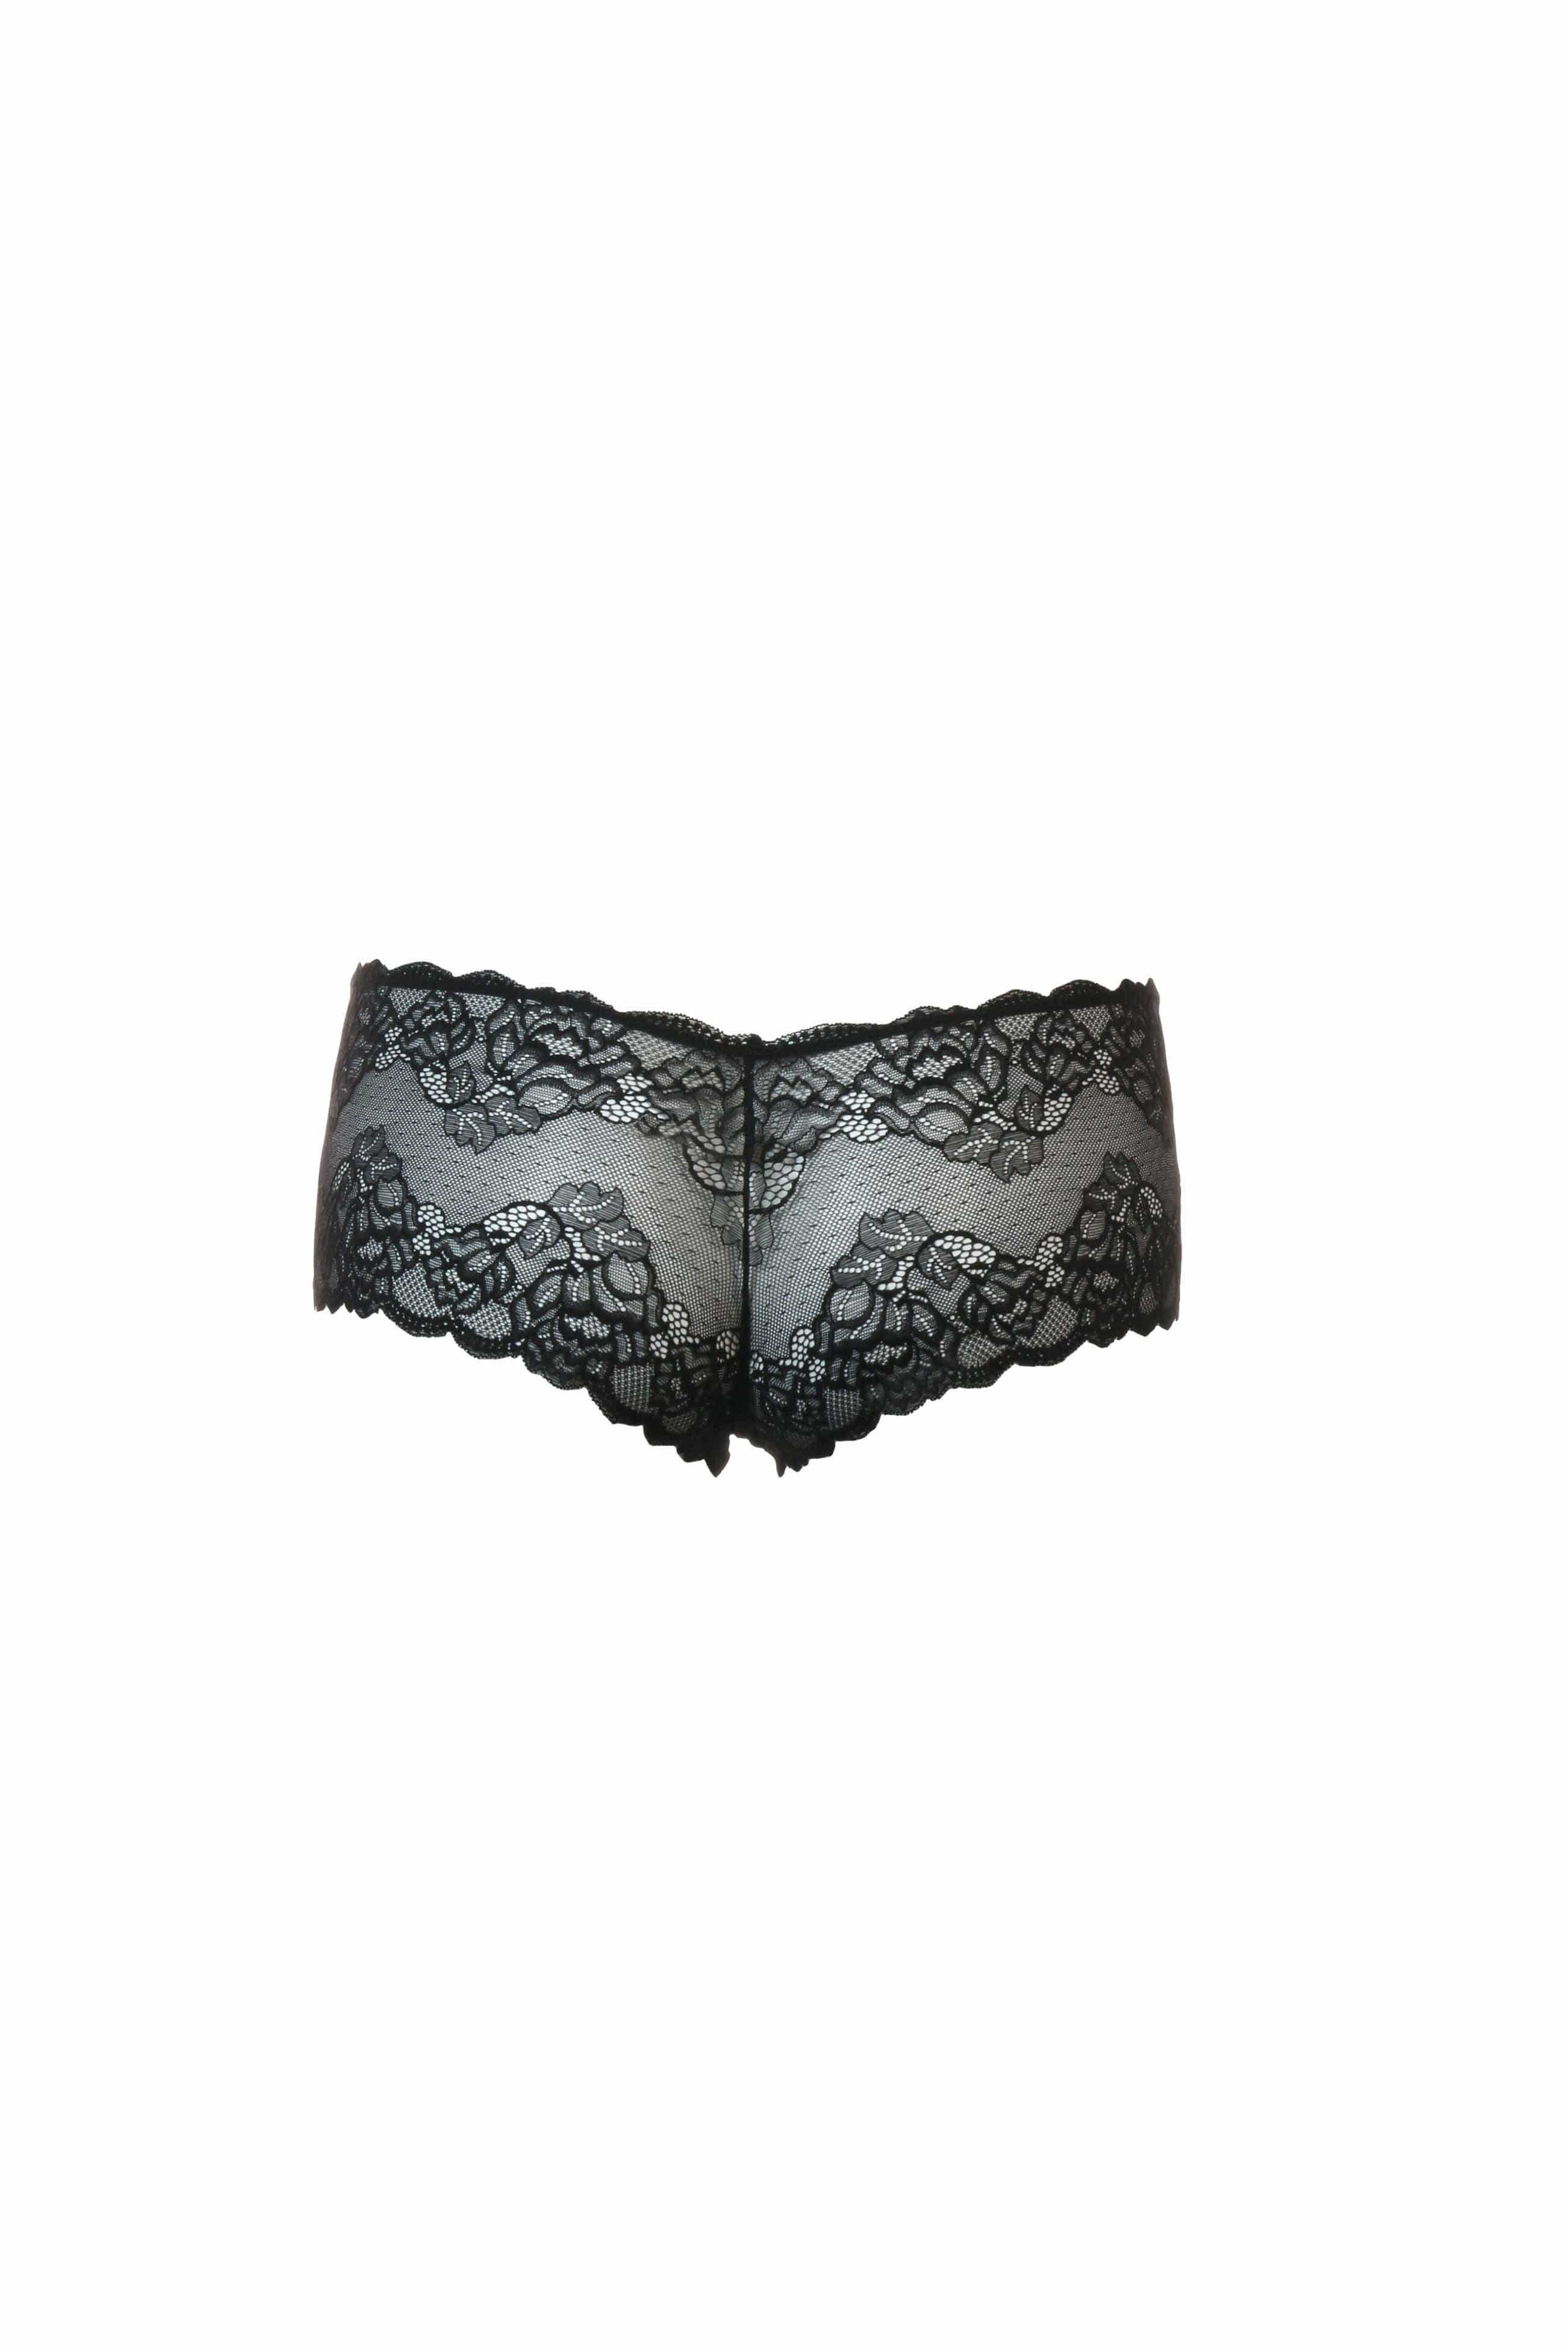 Link Up Lace Cheeky Panty in Black